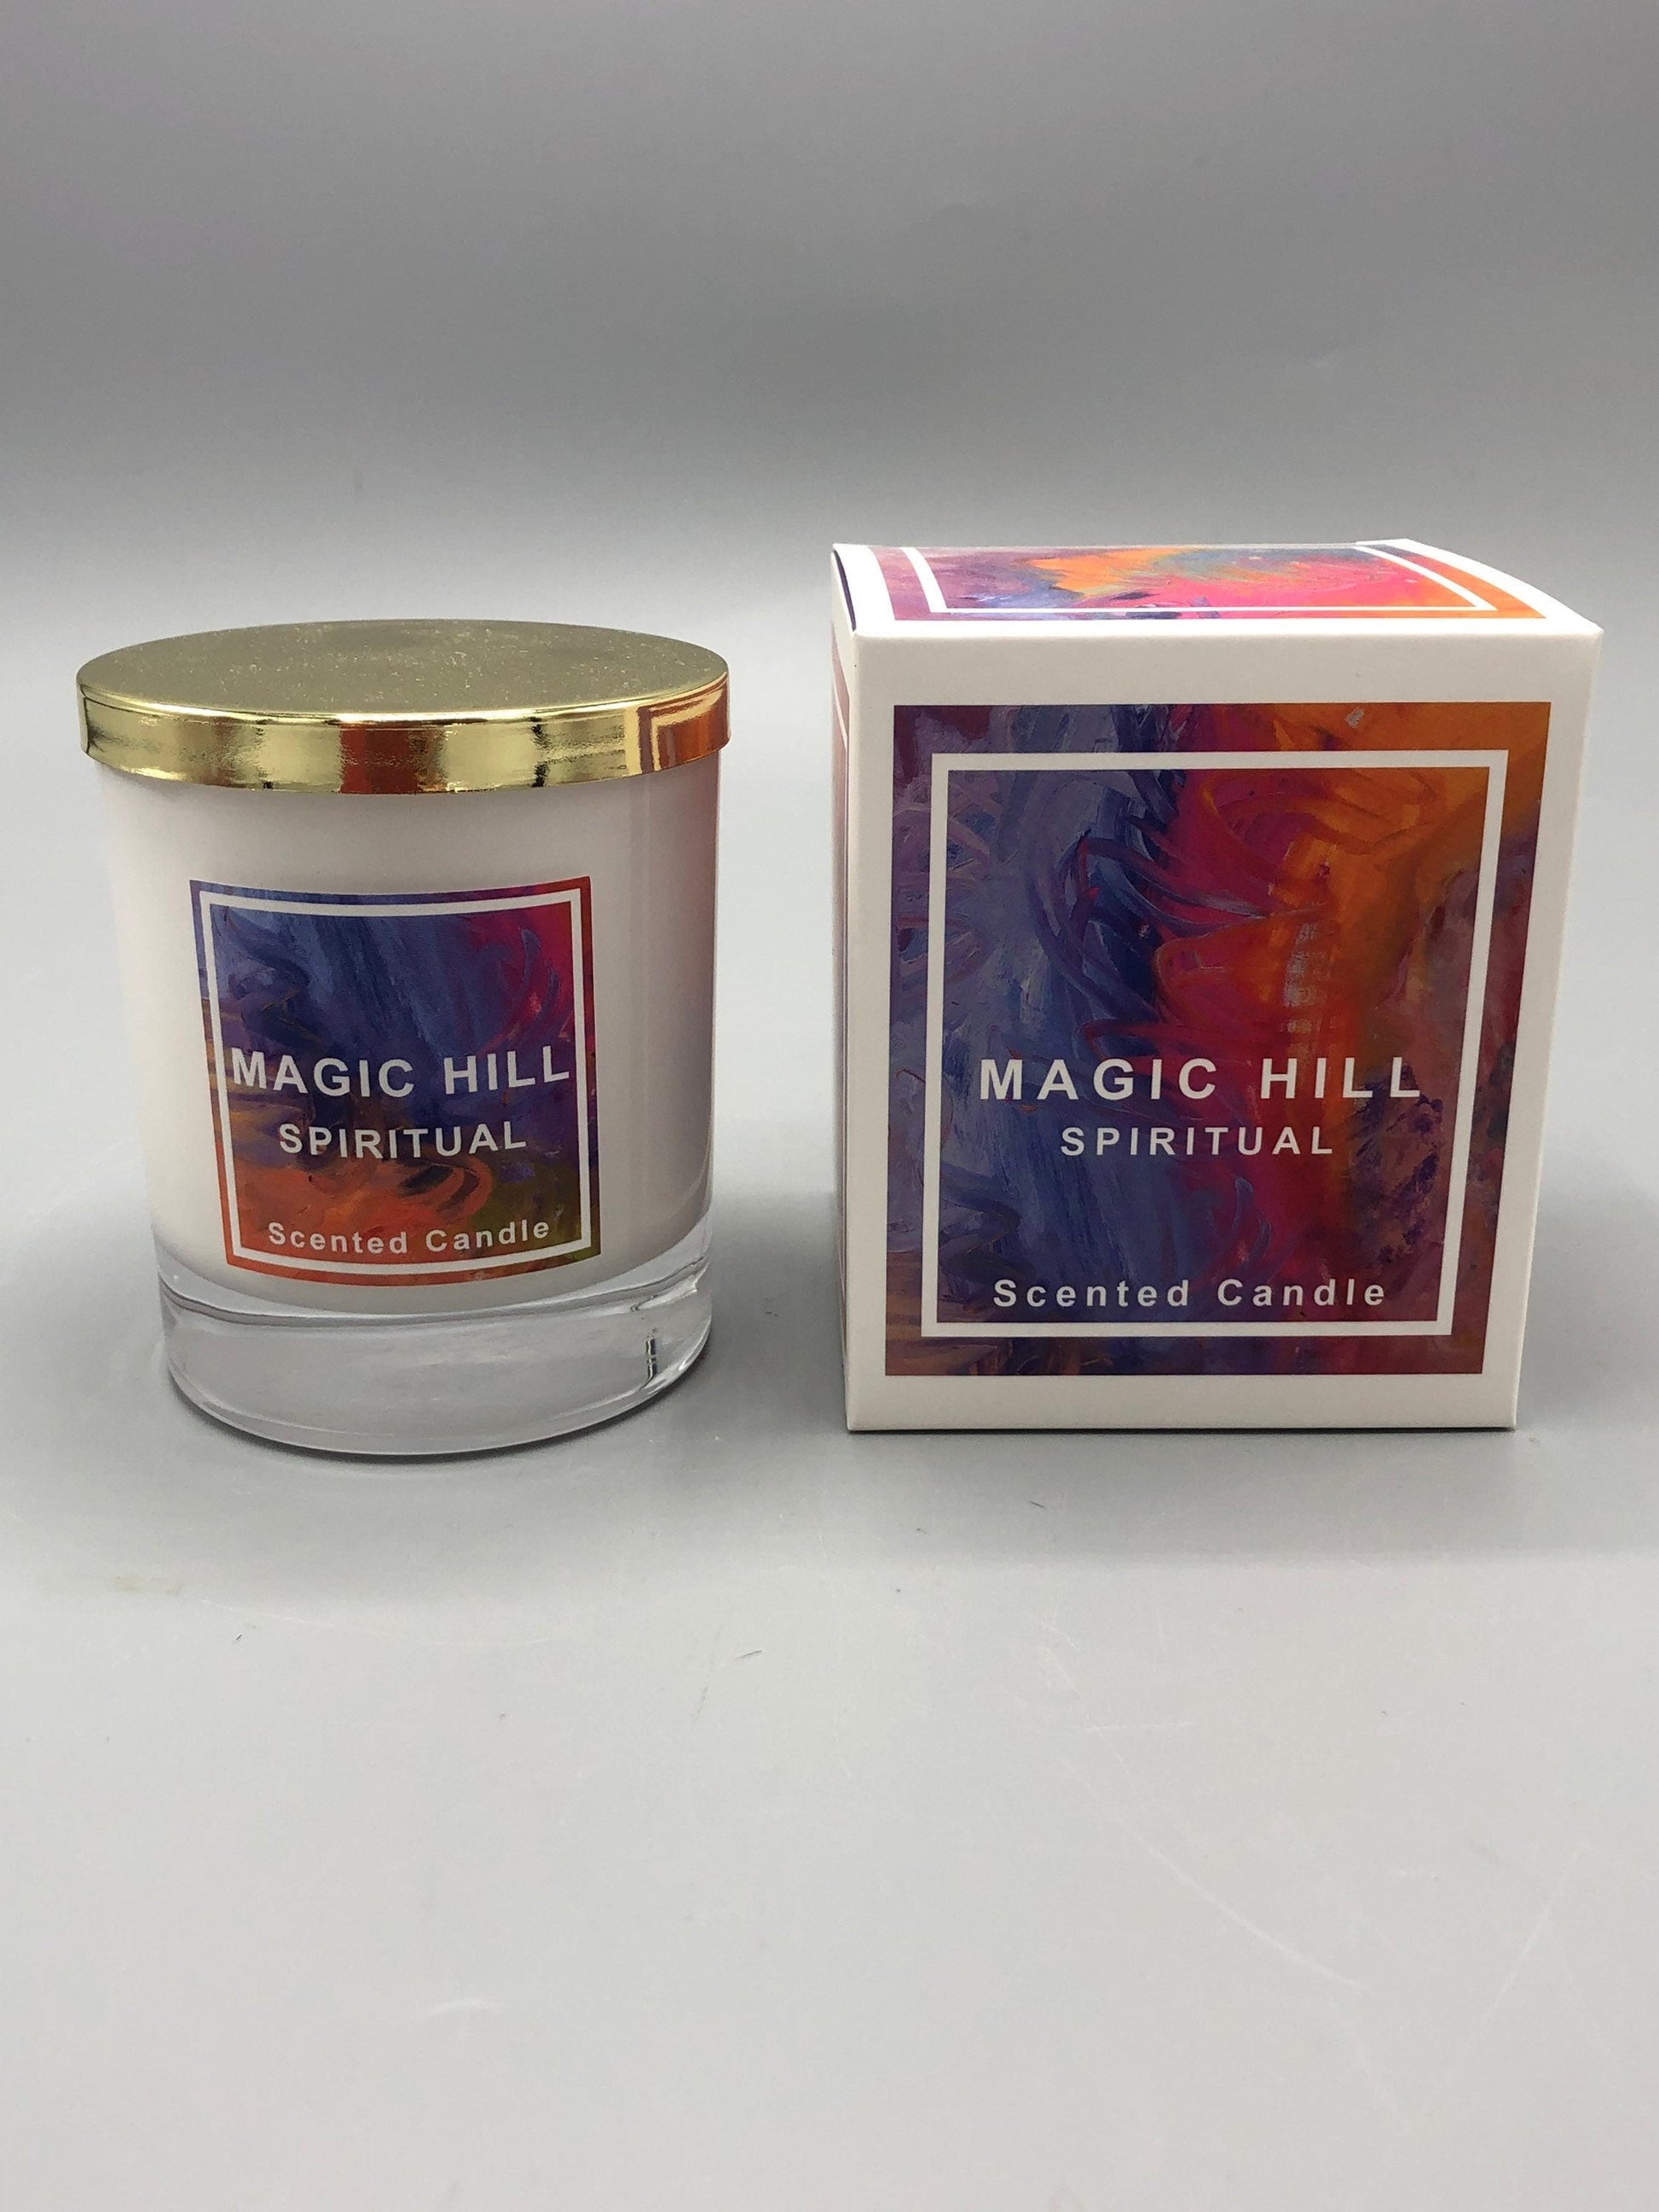 Hand poured coconut wax SPIRITUAL Scented Candle by Magic Hill